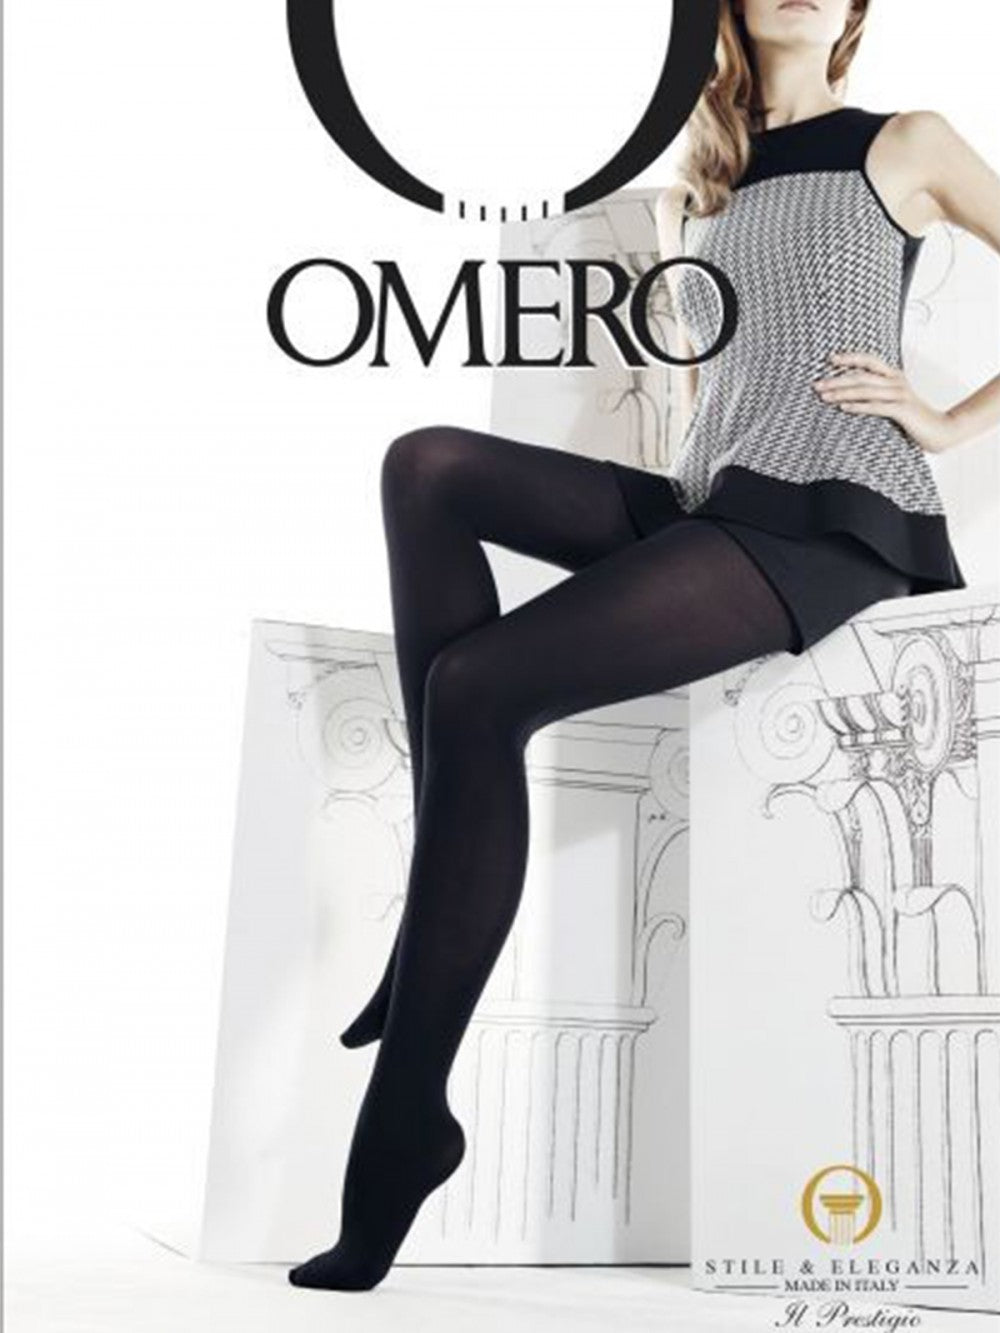 Omero Iride 50 Collant - 50 denier soft opaque tights in ivory, beige and pale / light grey